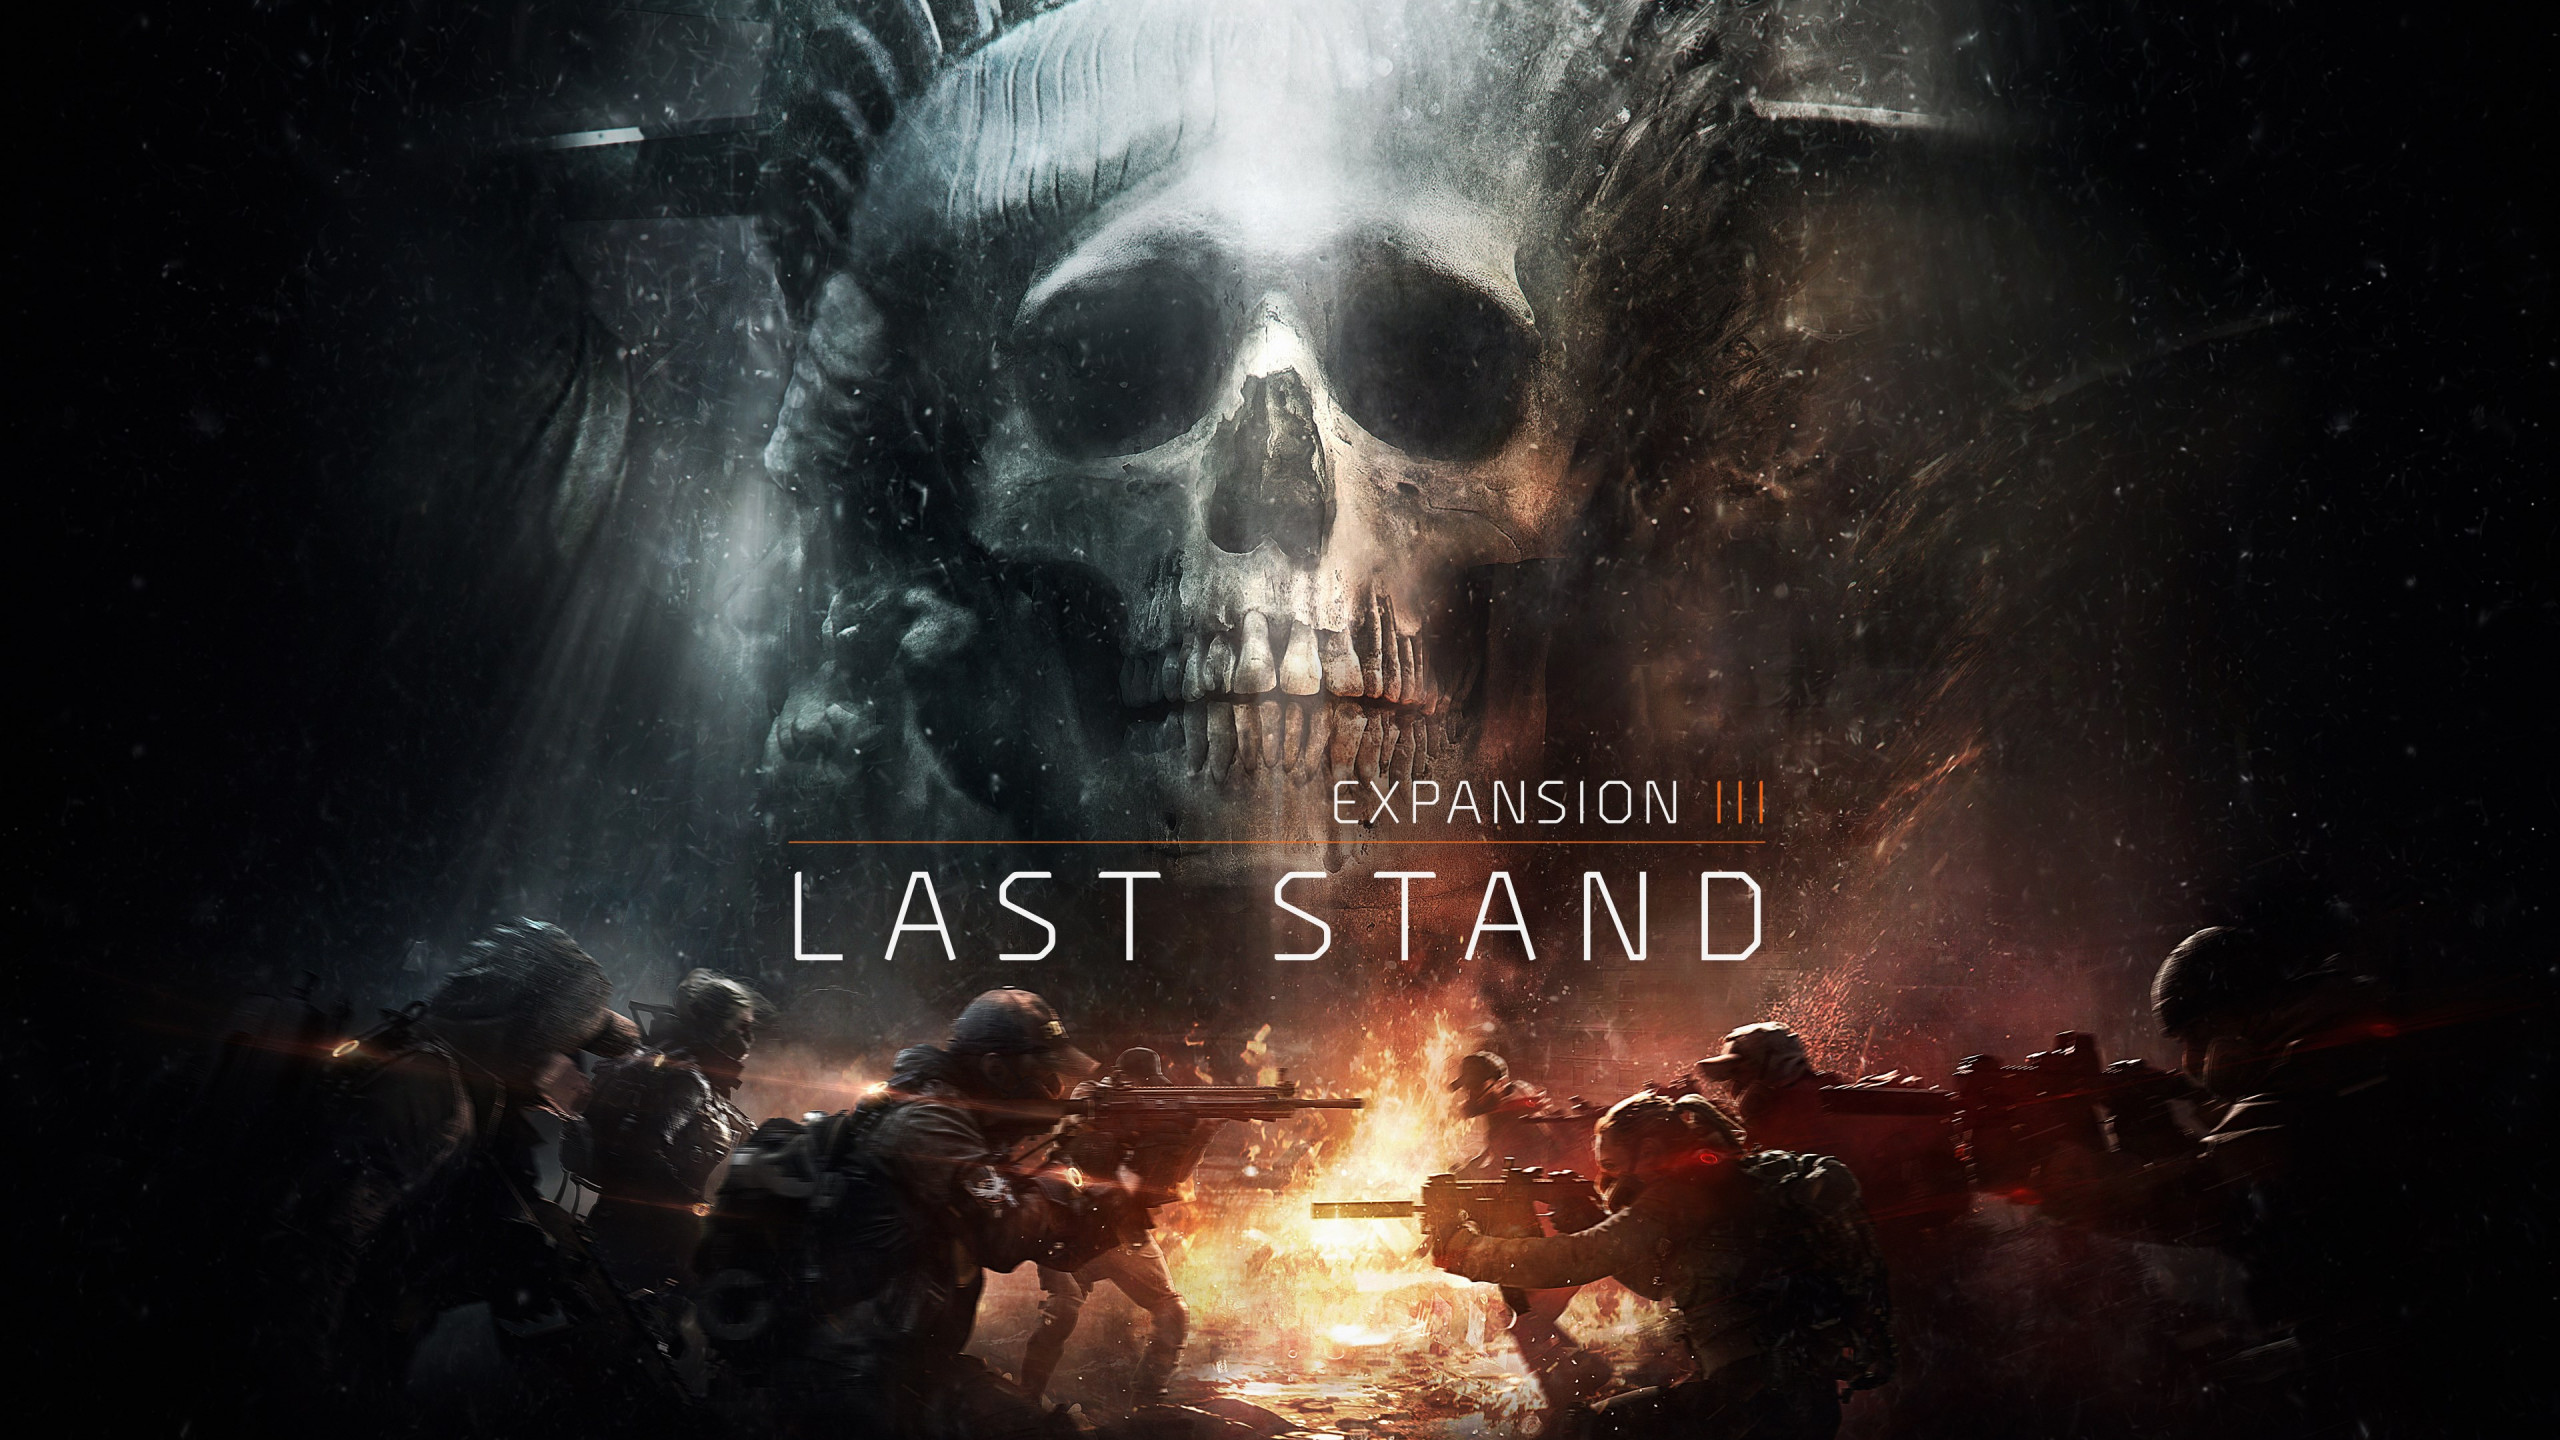 The Division Last Stand Expansion 3 wallpaper 2560x1440